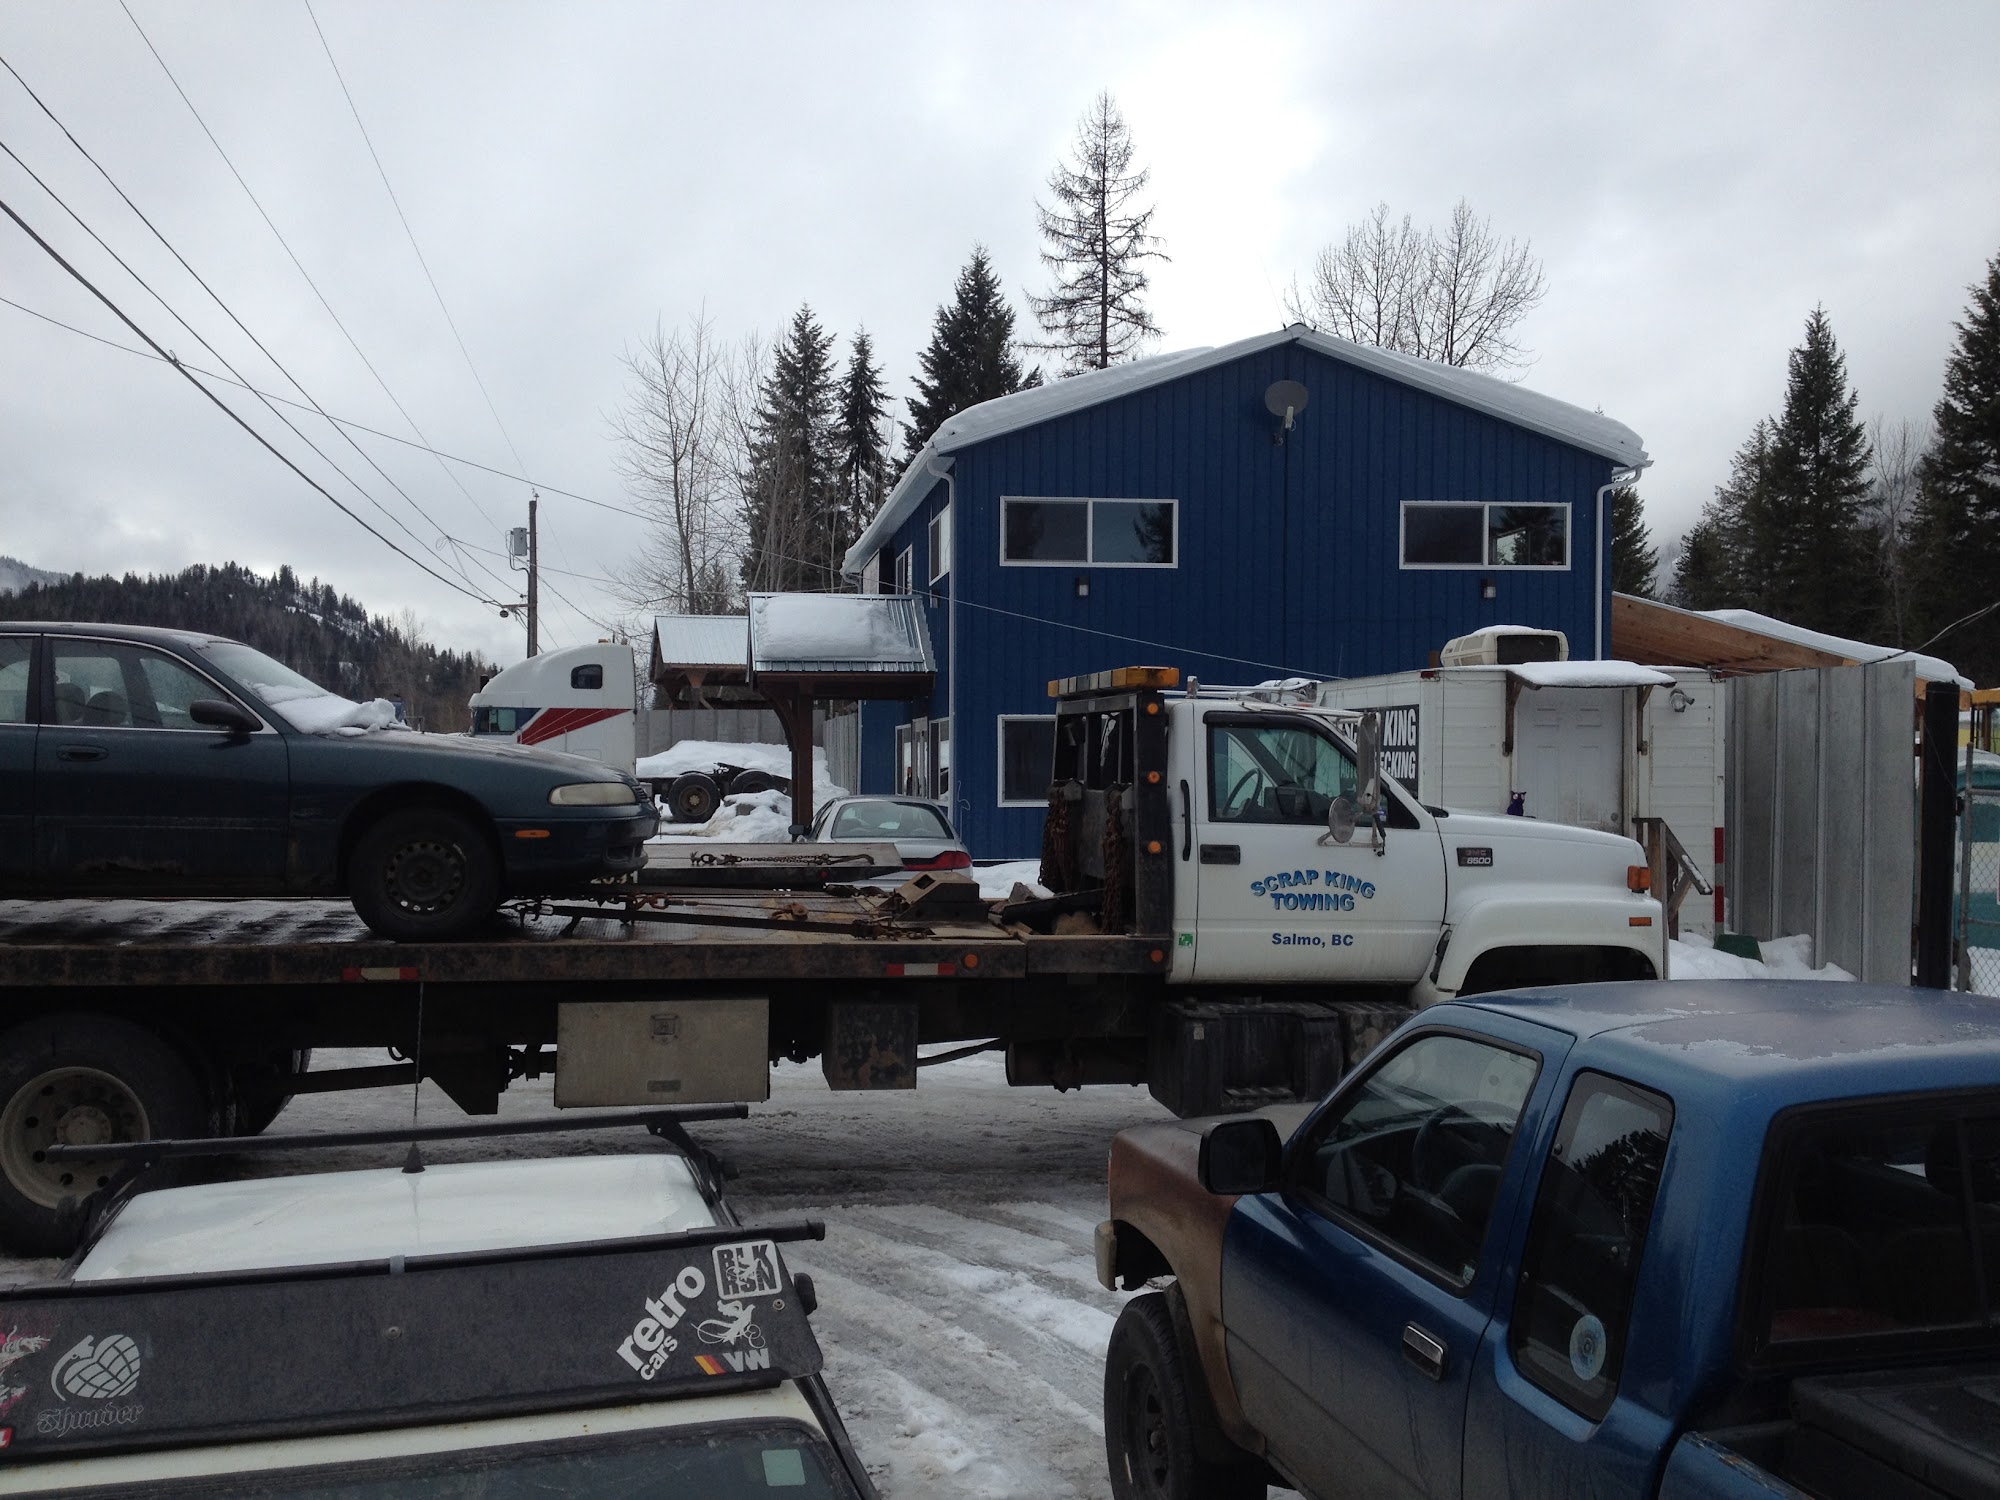 Scrap King Autowrecking & Towing Ltd 1660 Airport Rd, Salmo British Columbia V0G 1Z0